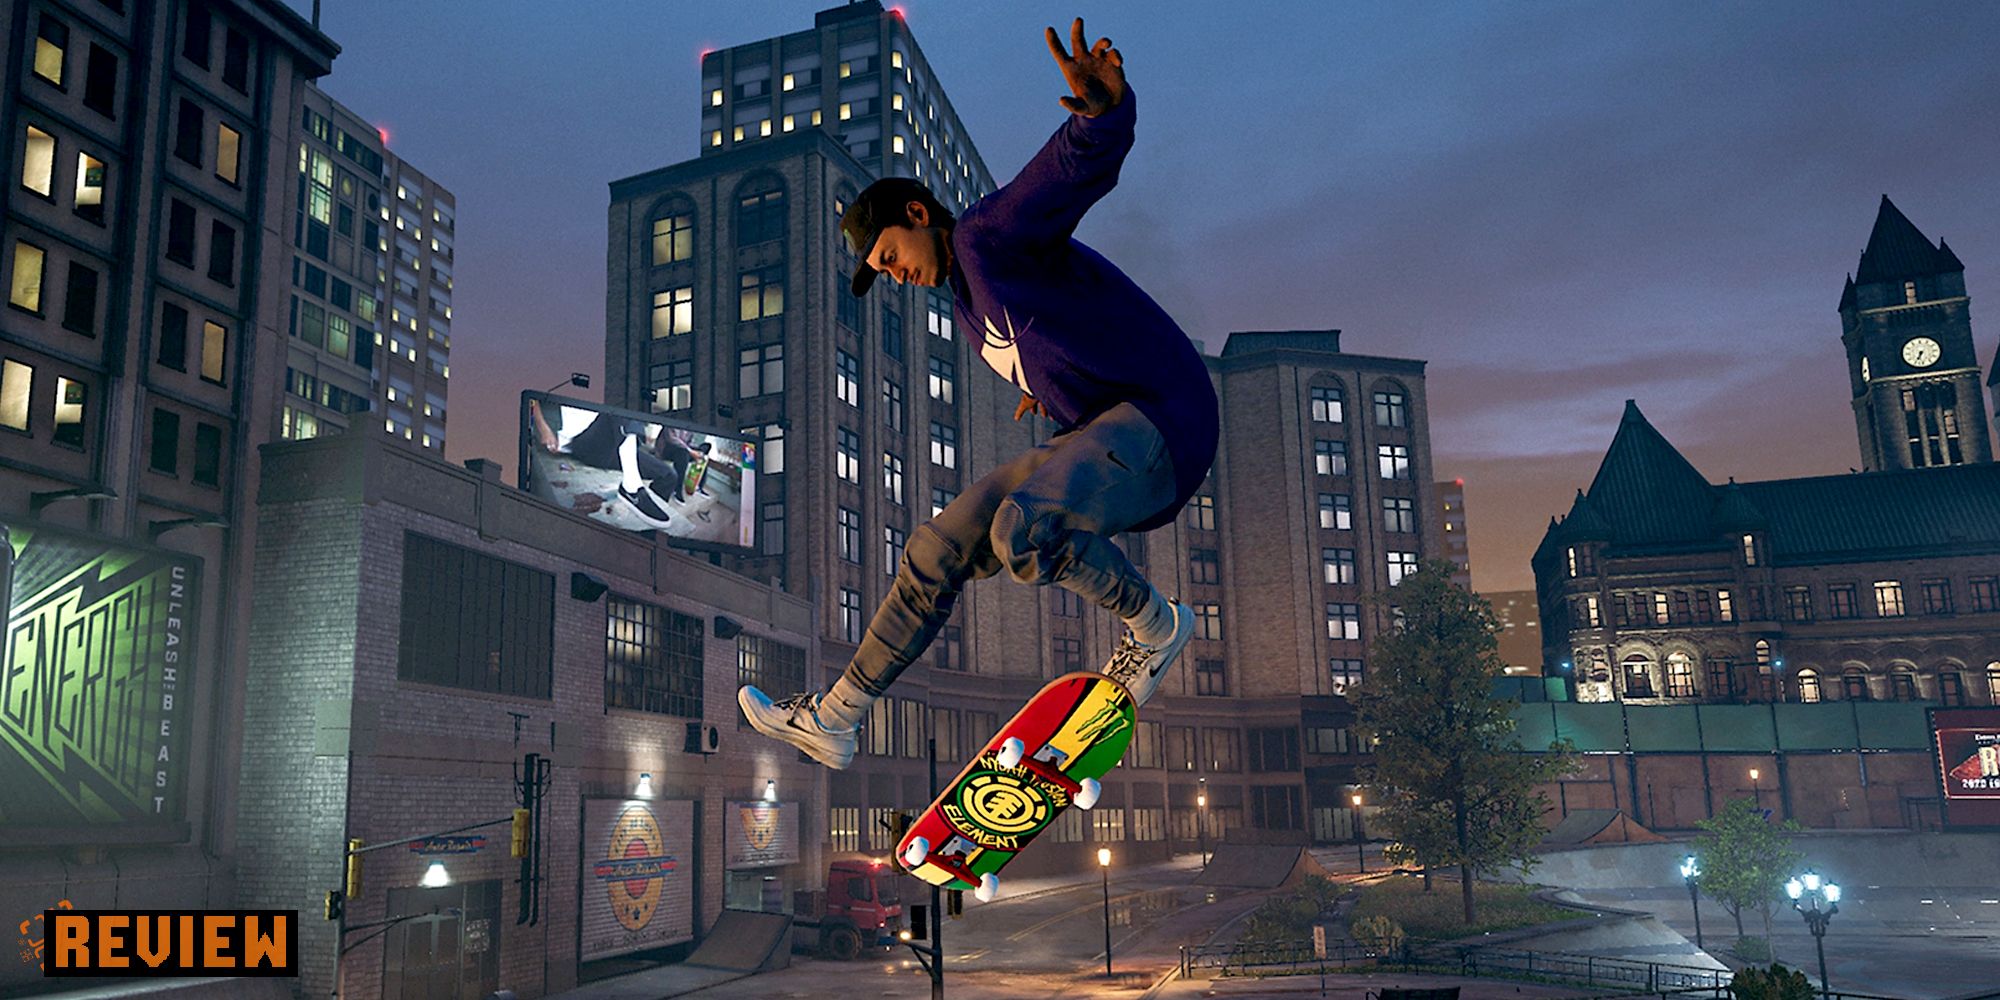 Game screen from Tony Hawk’s Pro Skater 1 + 2.